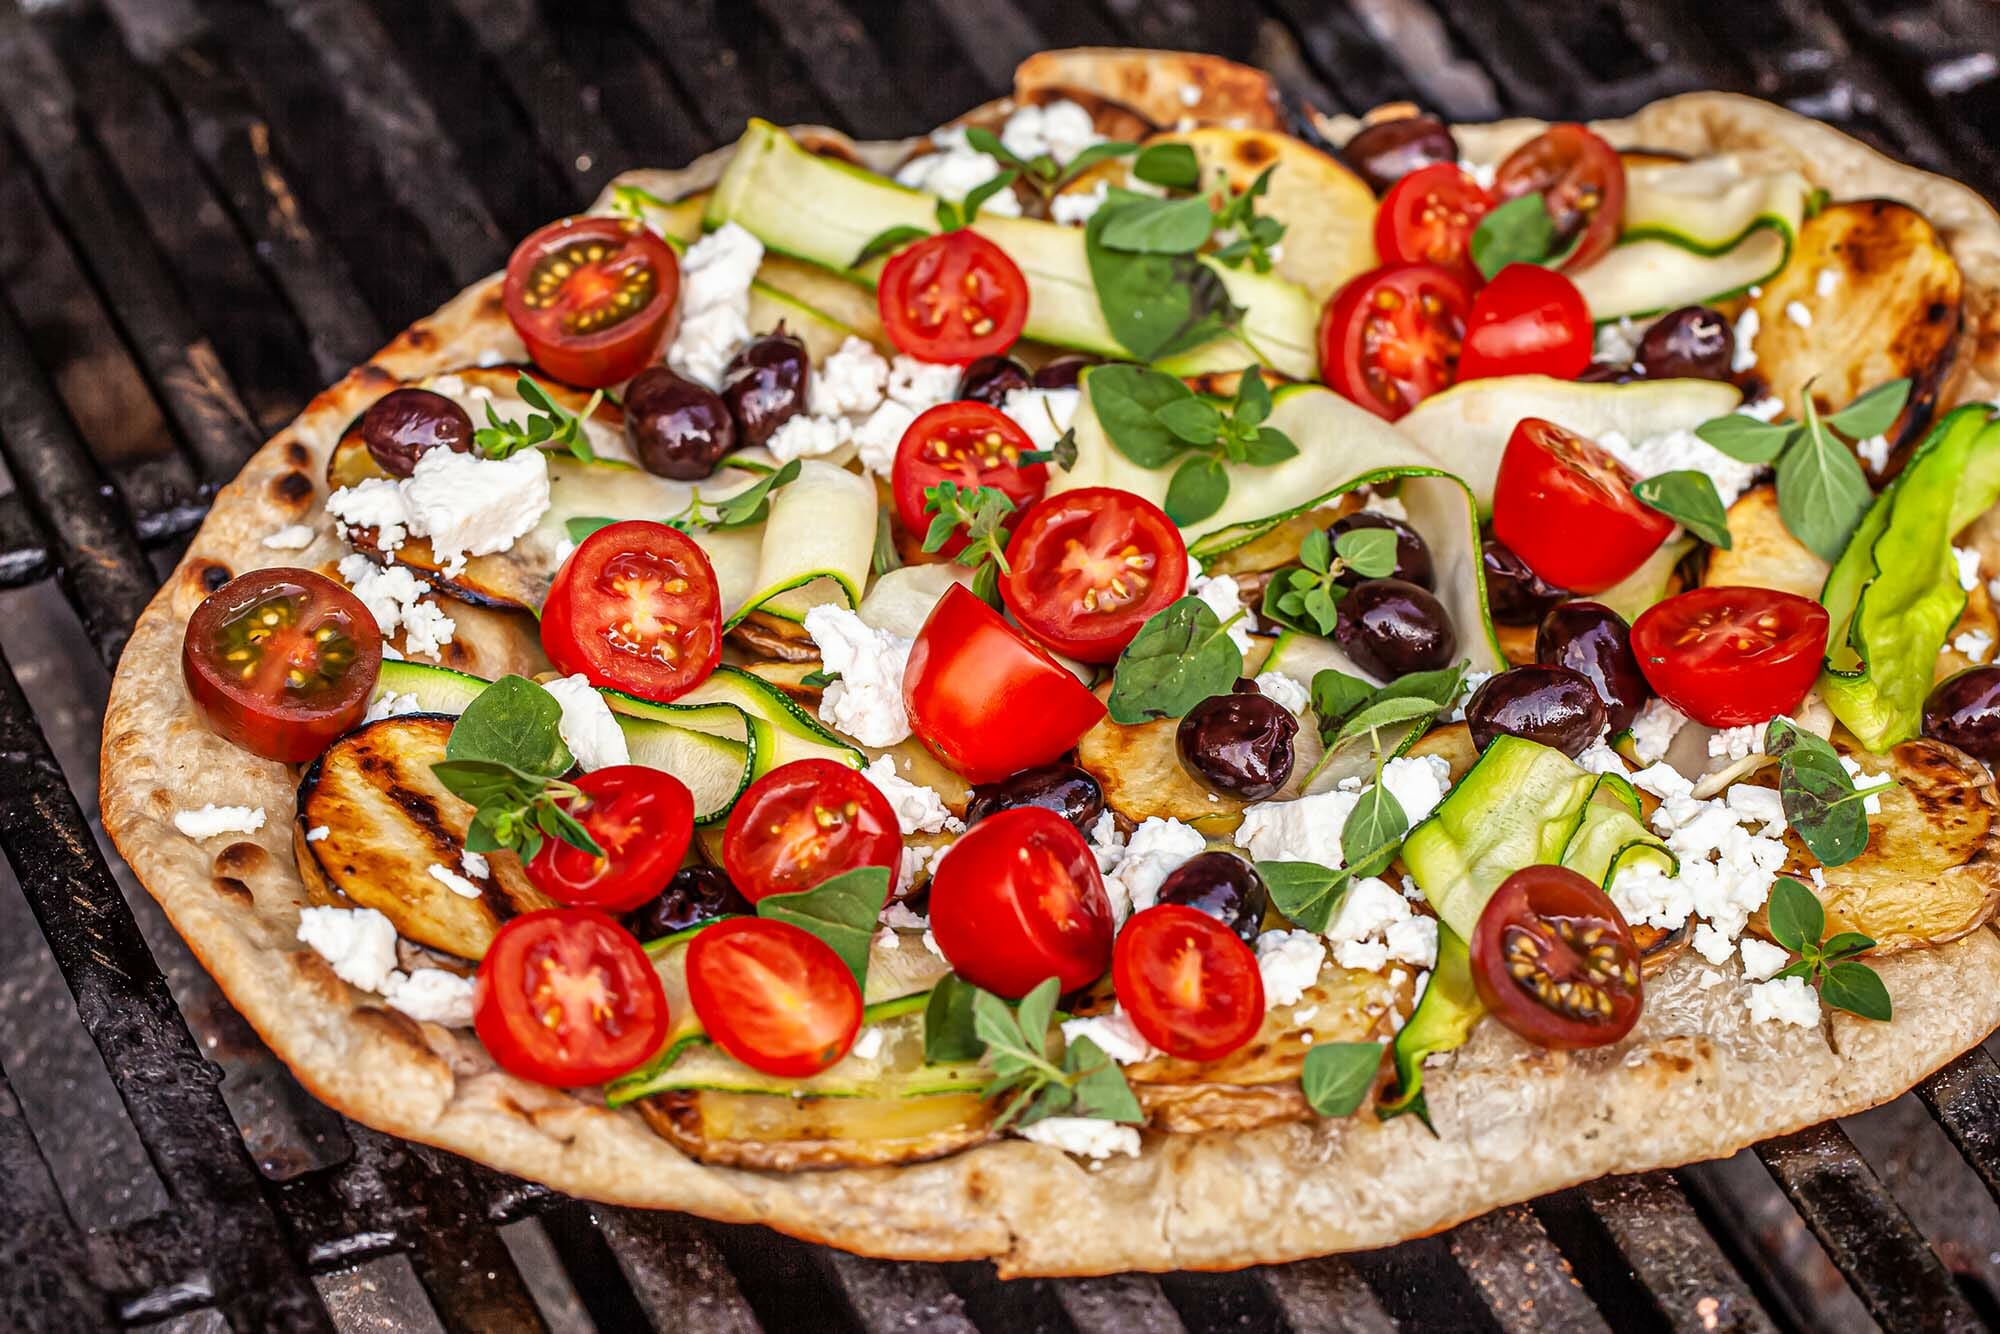 Grilled greek pizza on a grill and topped with halved tomatoes, black olives, cheese, zucchini ribbons and sliced potatoes.